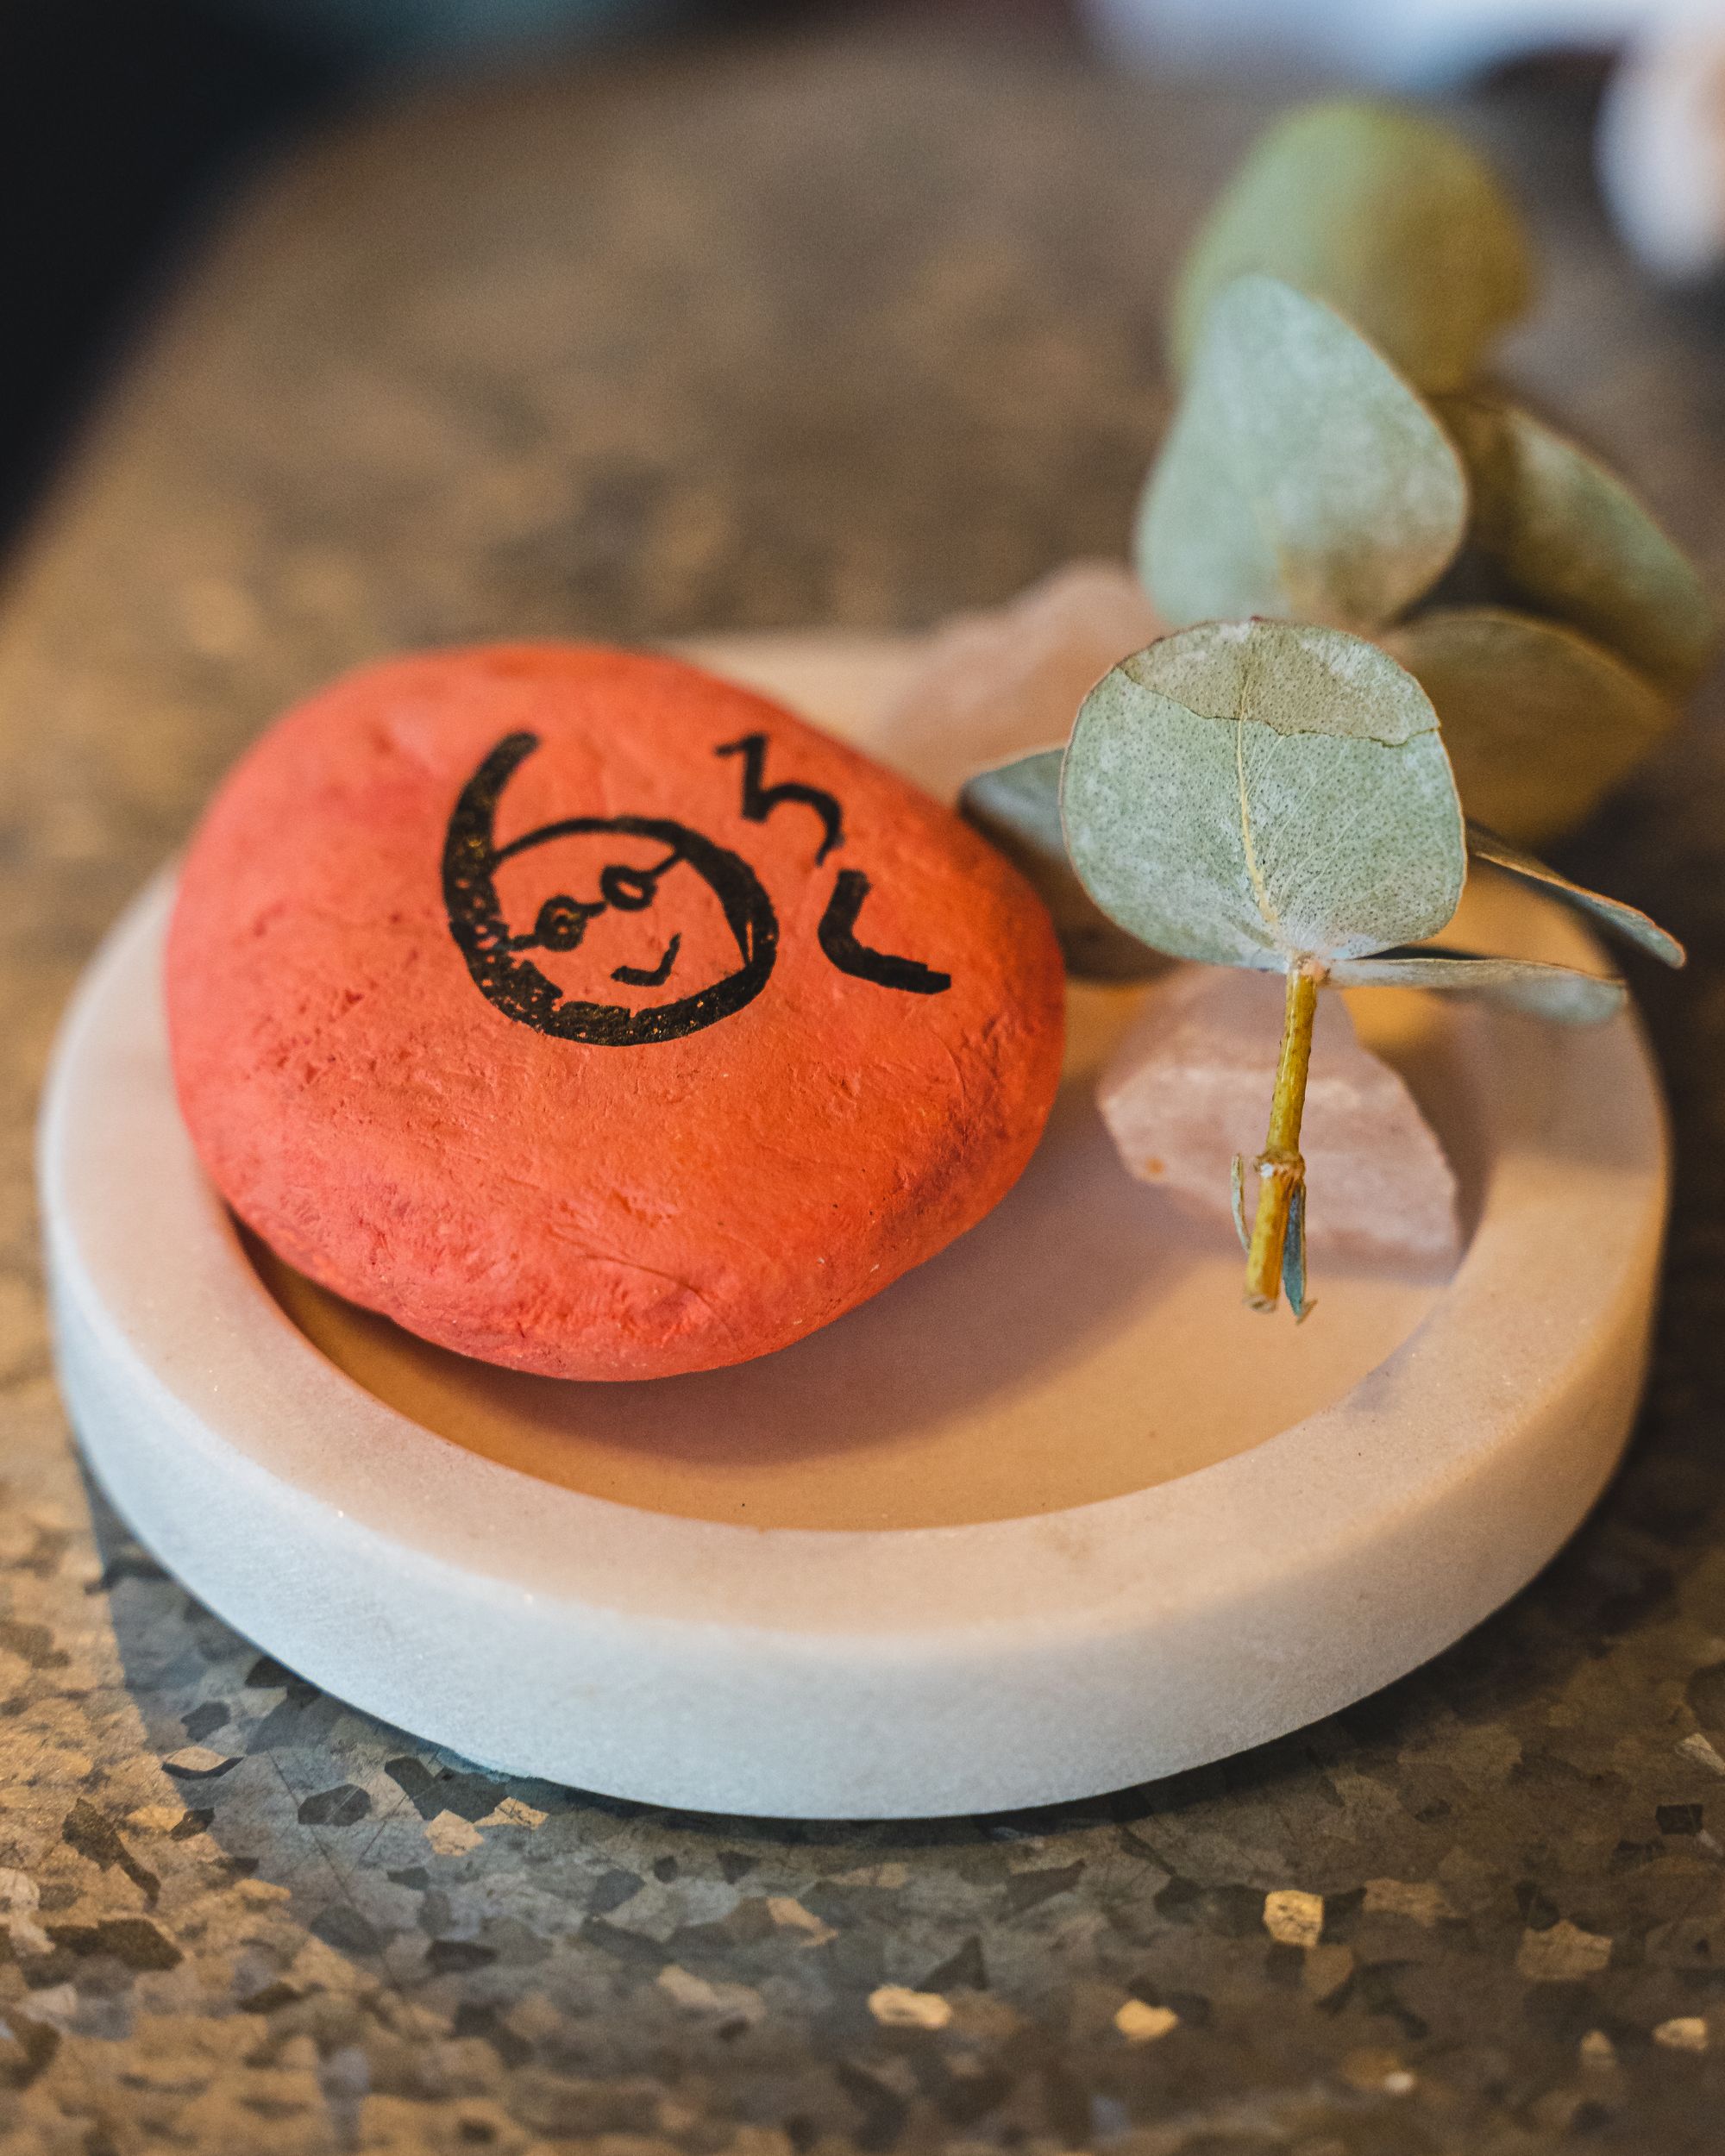 Orange coloured pebble with the number 6 and "roku" written in hiragana